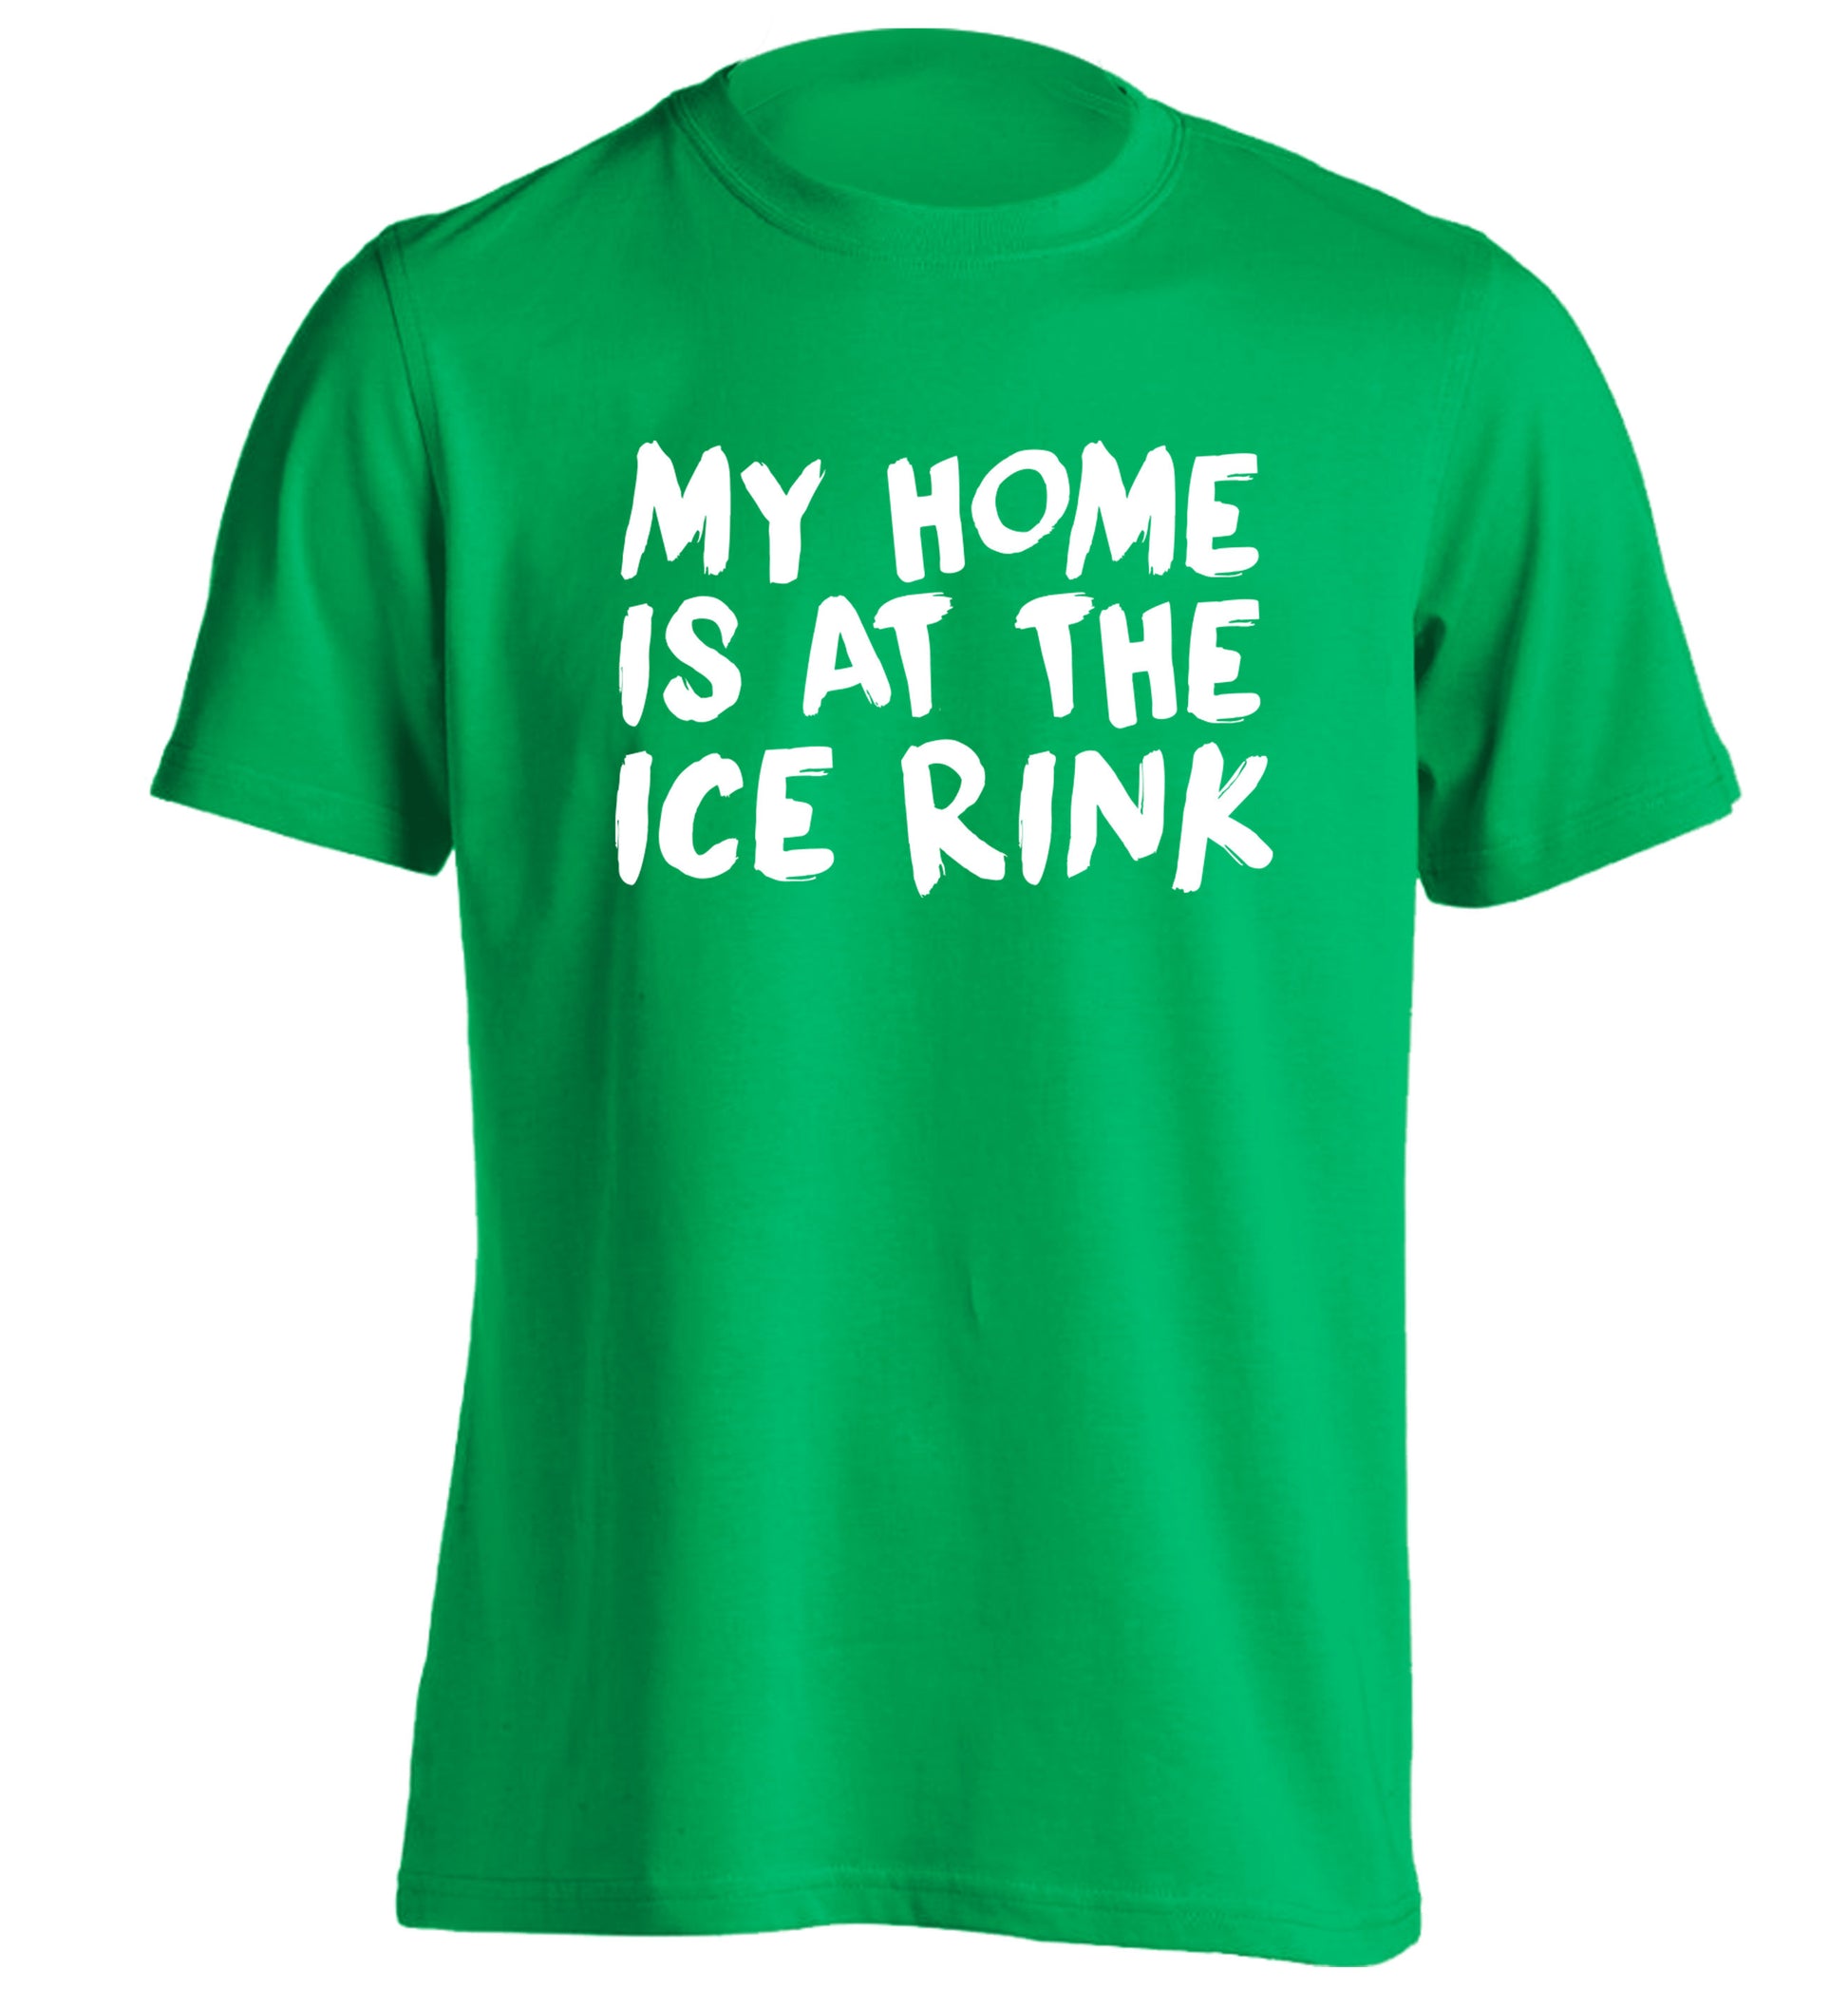 My home is at the ice rink adults unisex green Tshirt 2XL